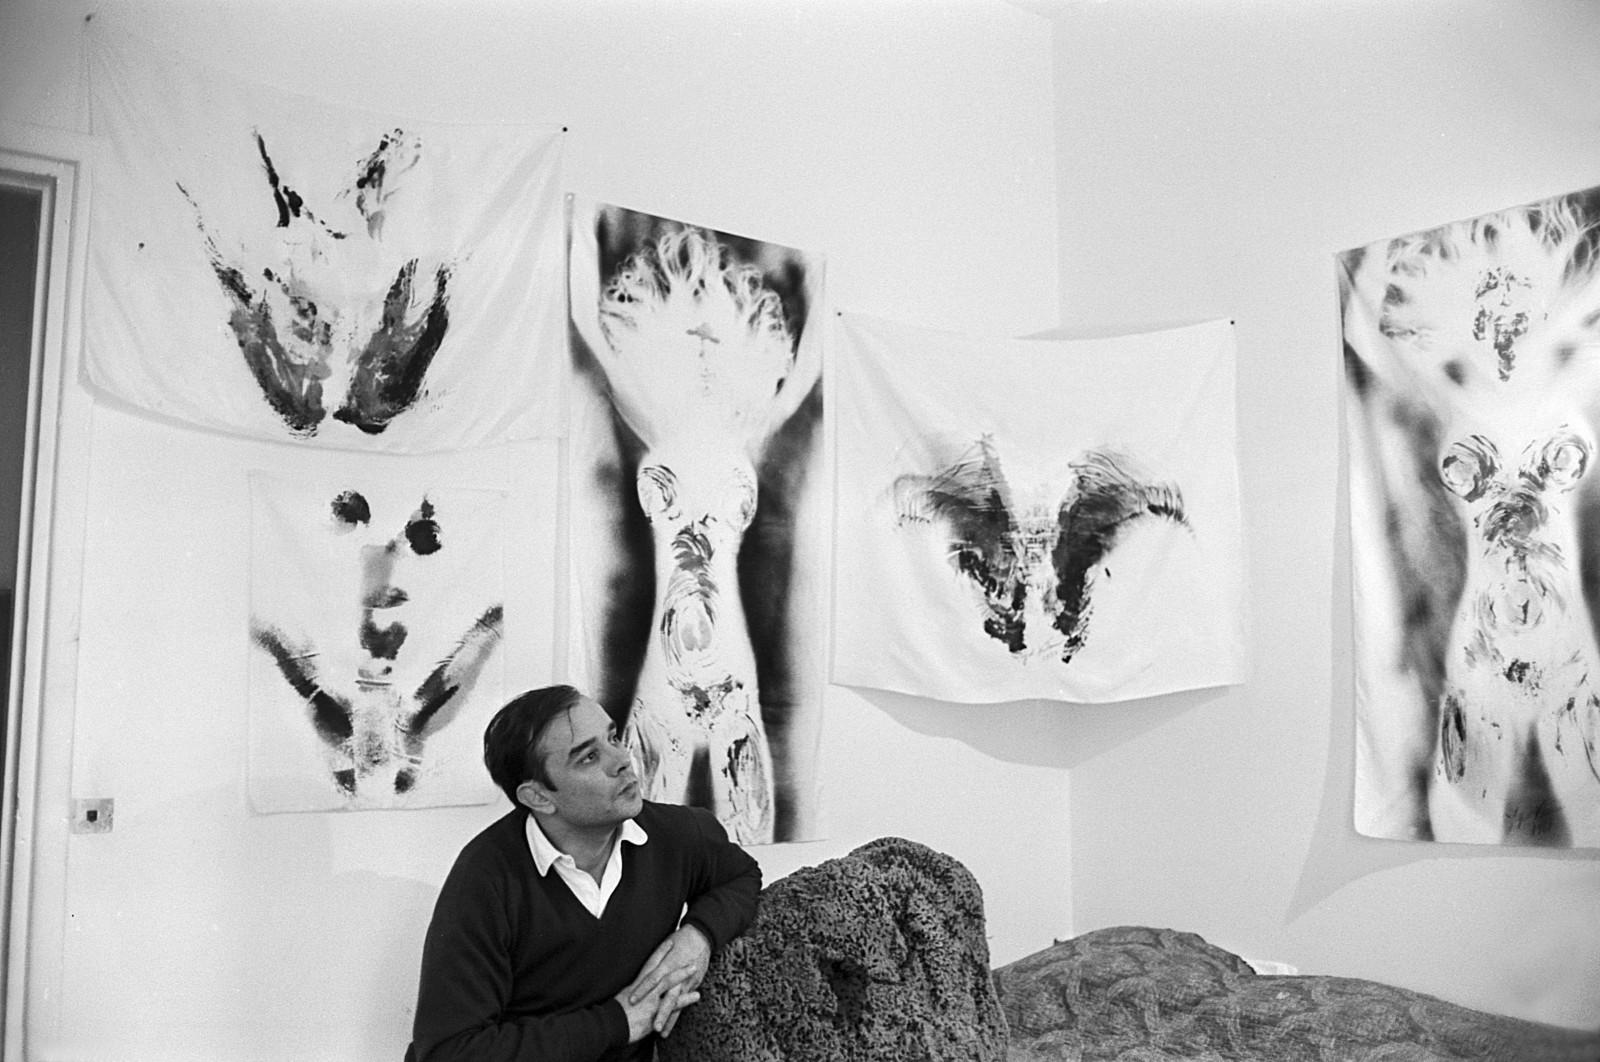 Yves Klein in front of his Shroud Anthropometries  (ANT SU 3, ANT SU 21, ANT SU 20, ANT SU 2, ANT SU 24)